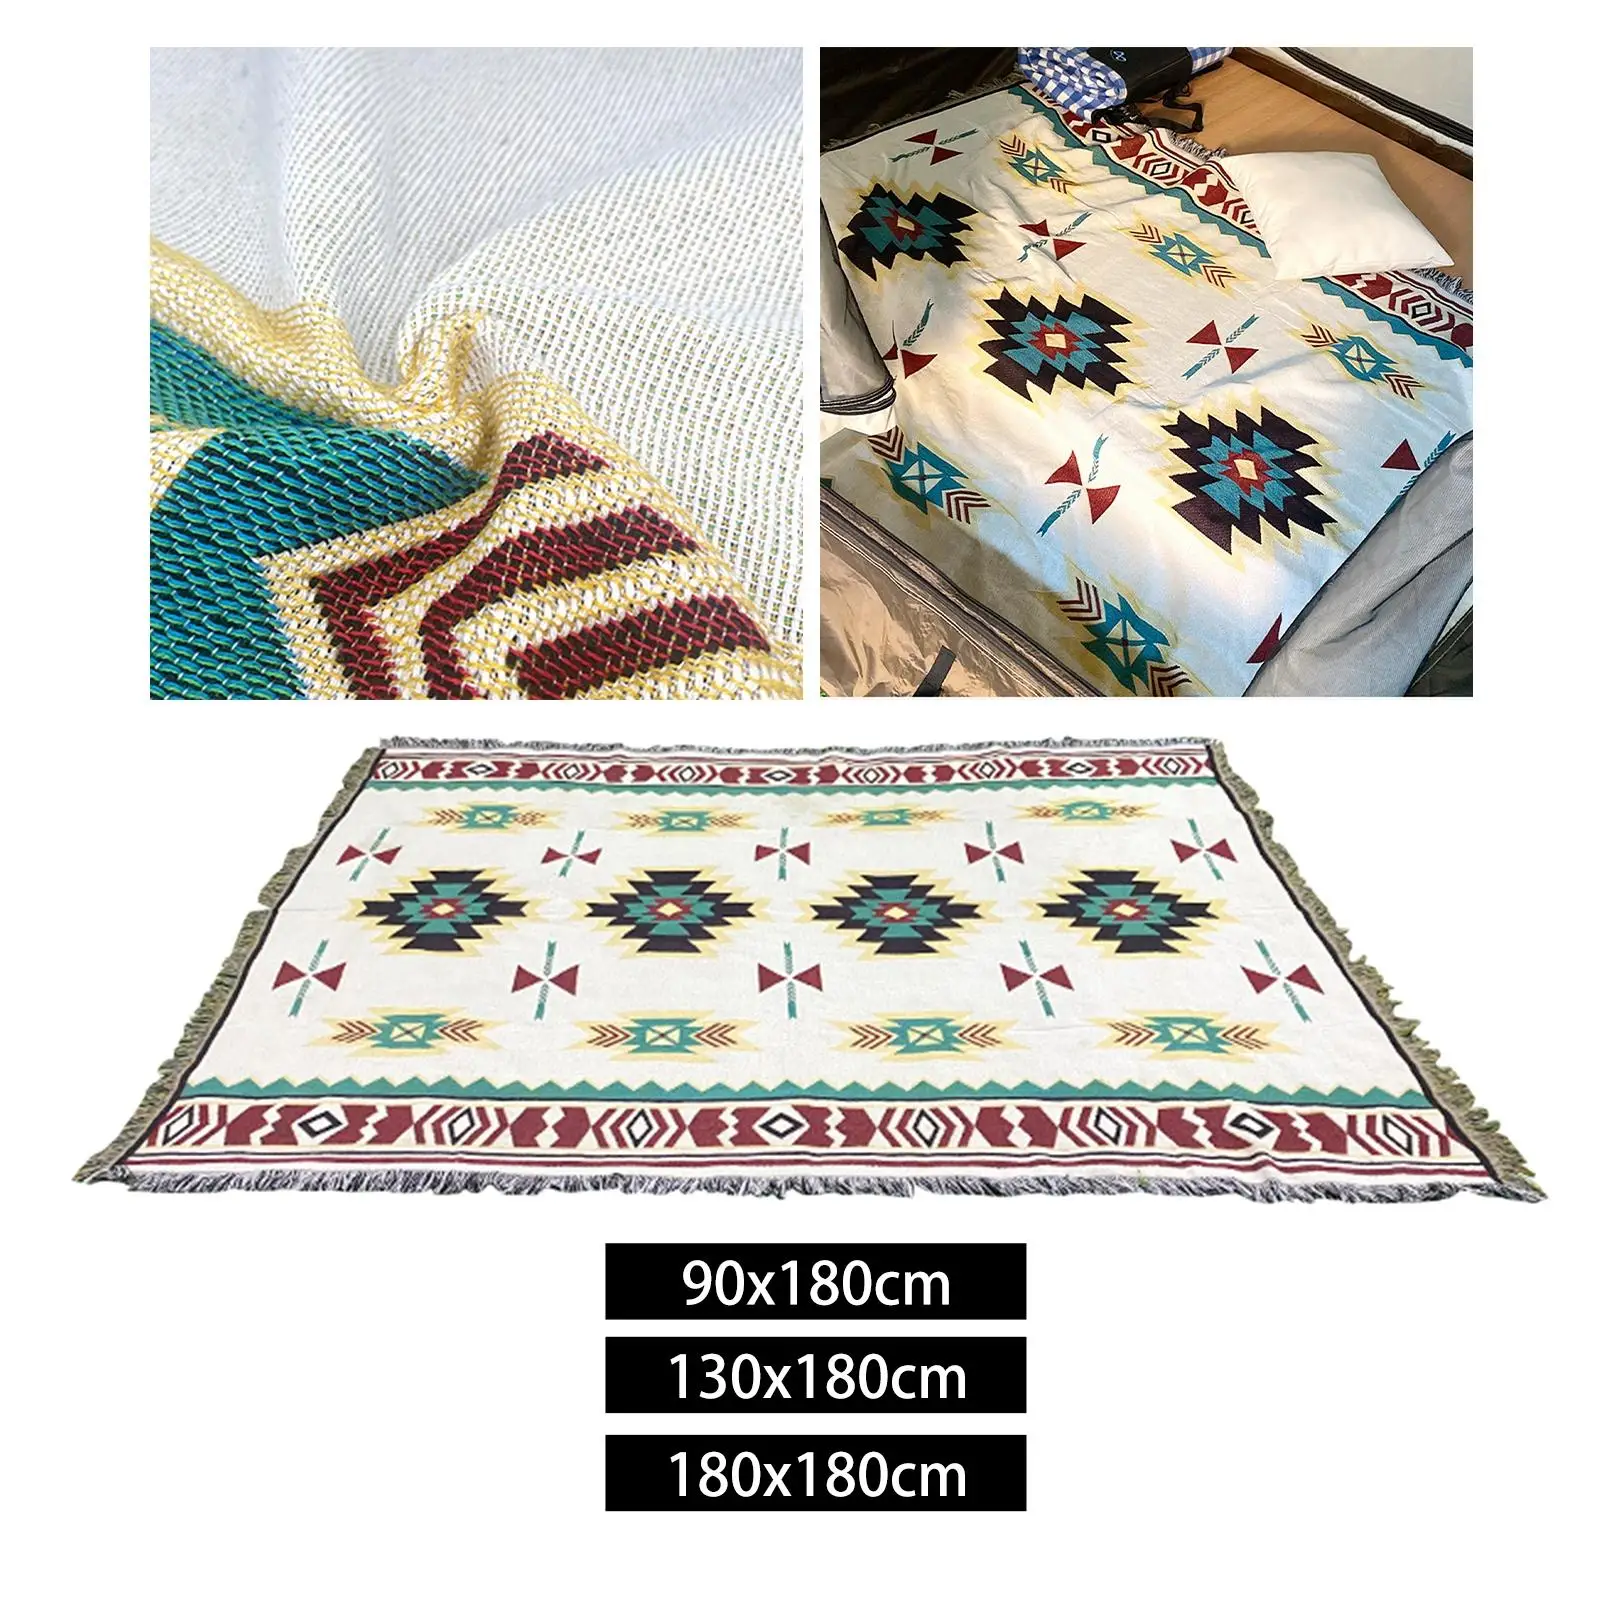 Picnic mat Blanket Breathable Casual Carpet for Outdoor Picnic, Indoor,